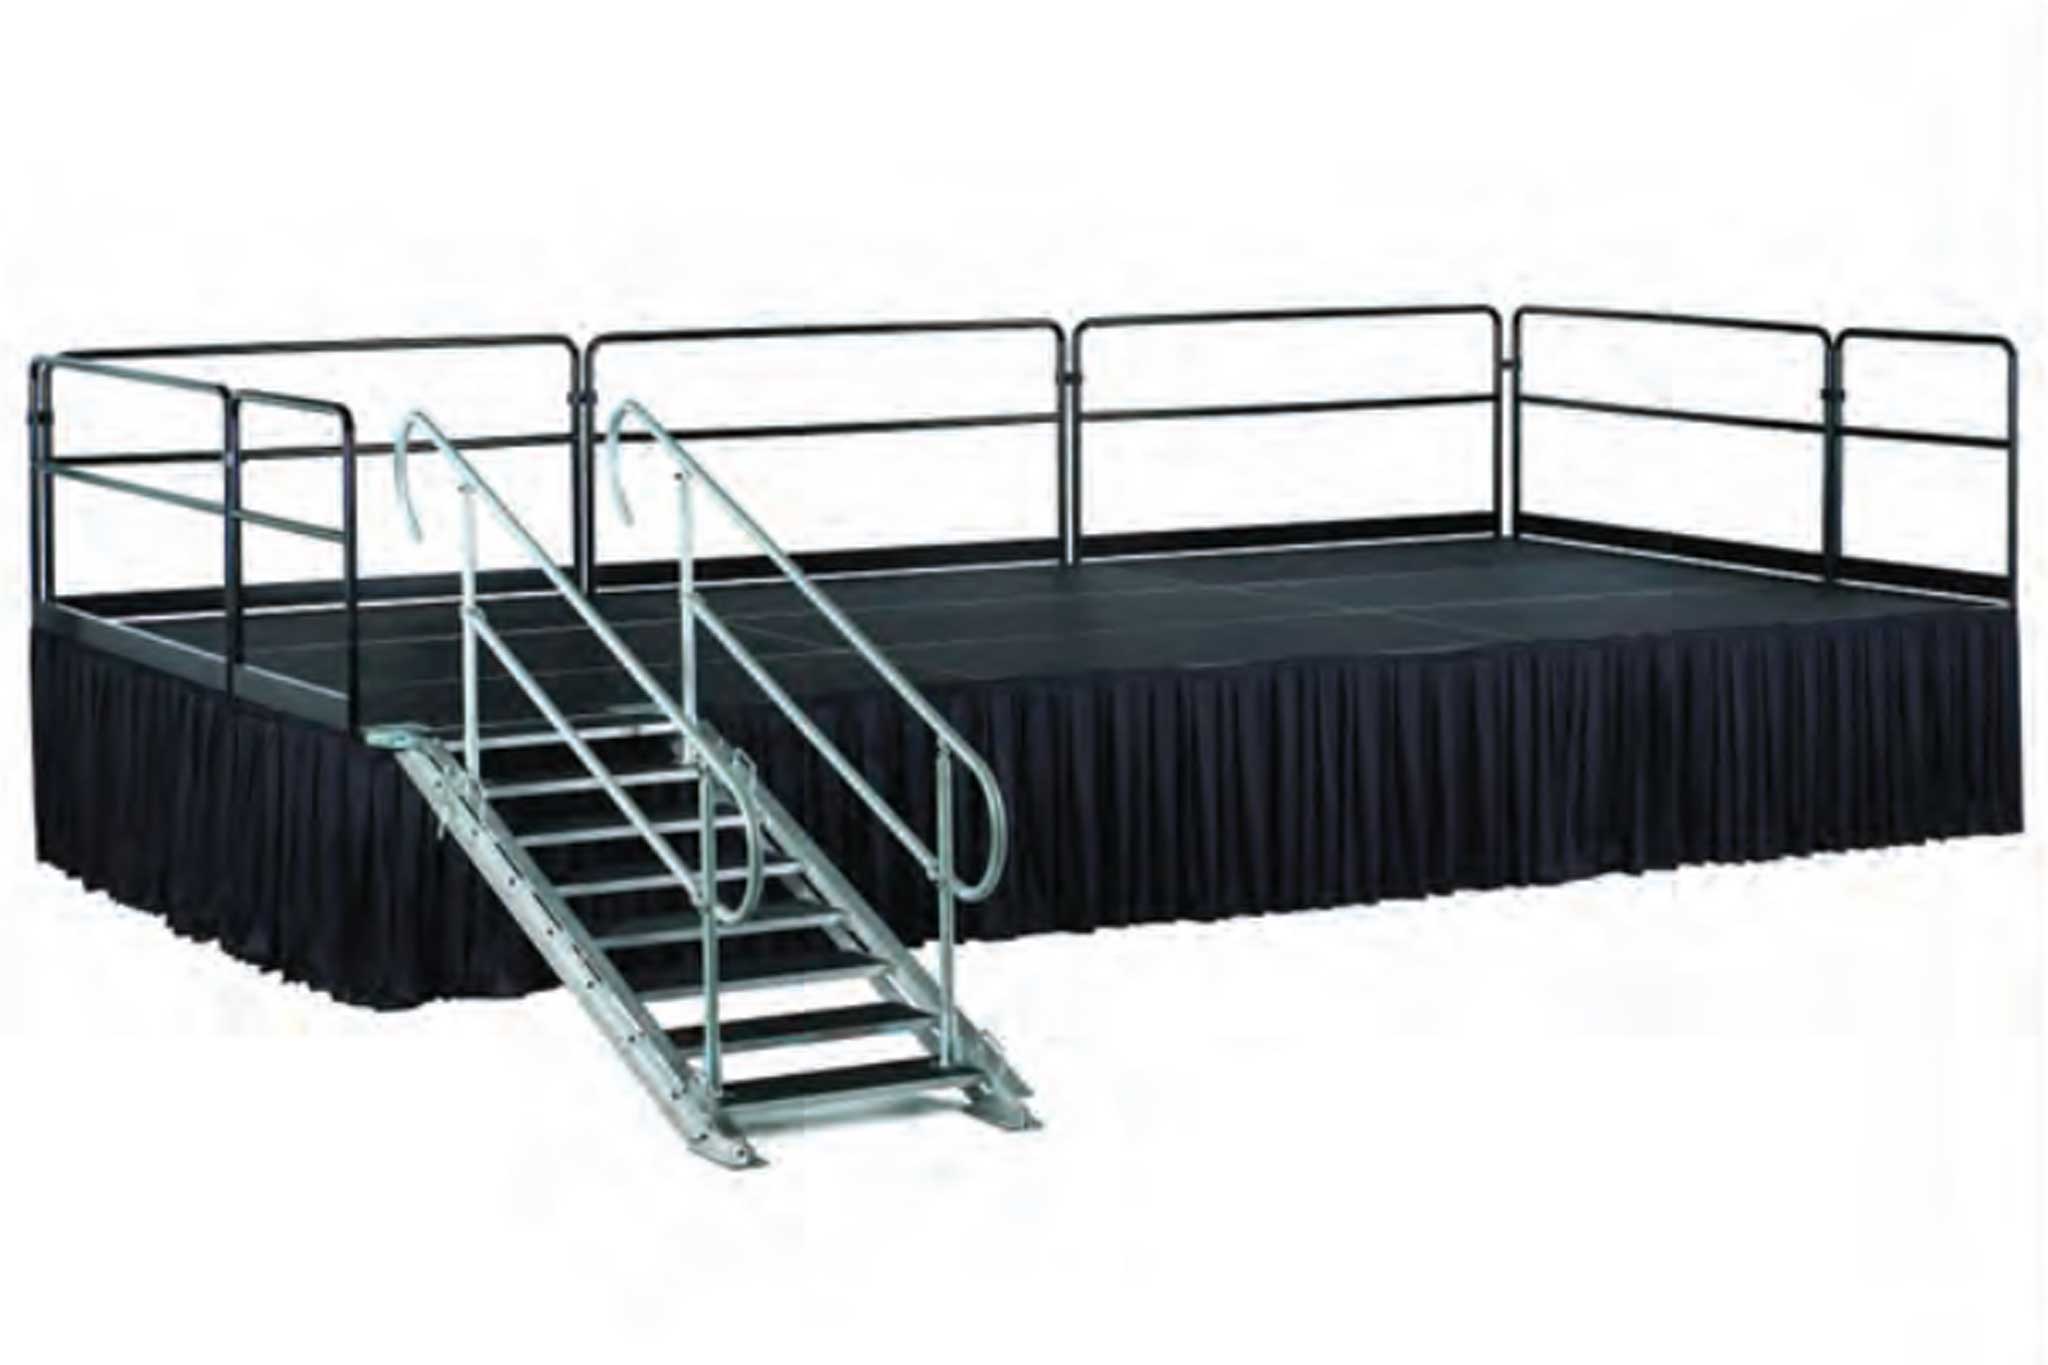 Picture of a platform stage.